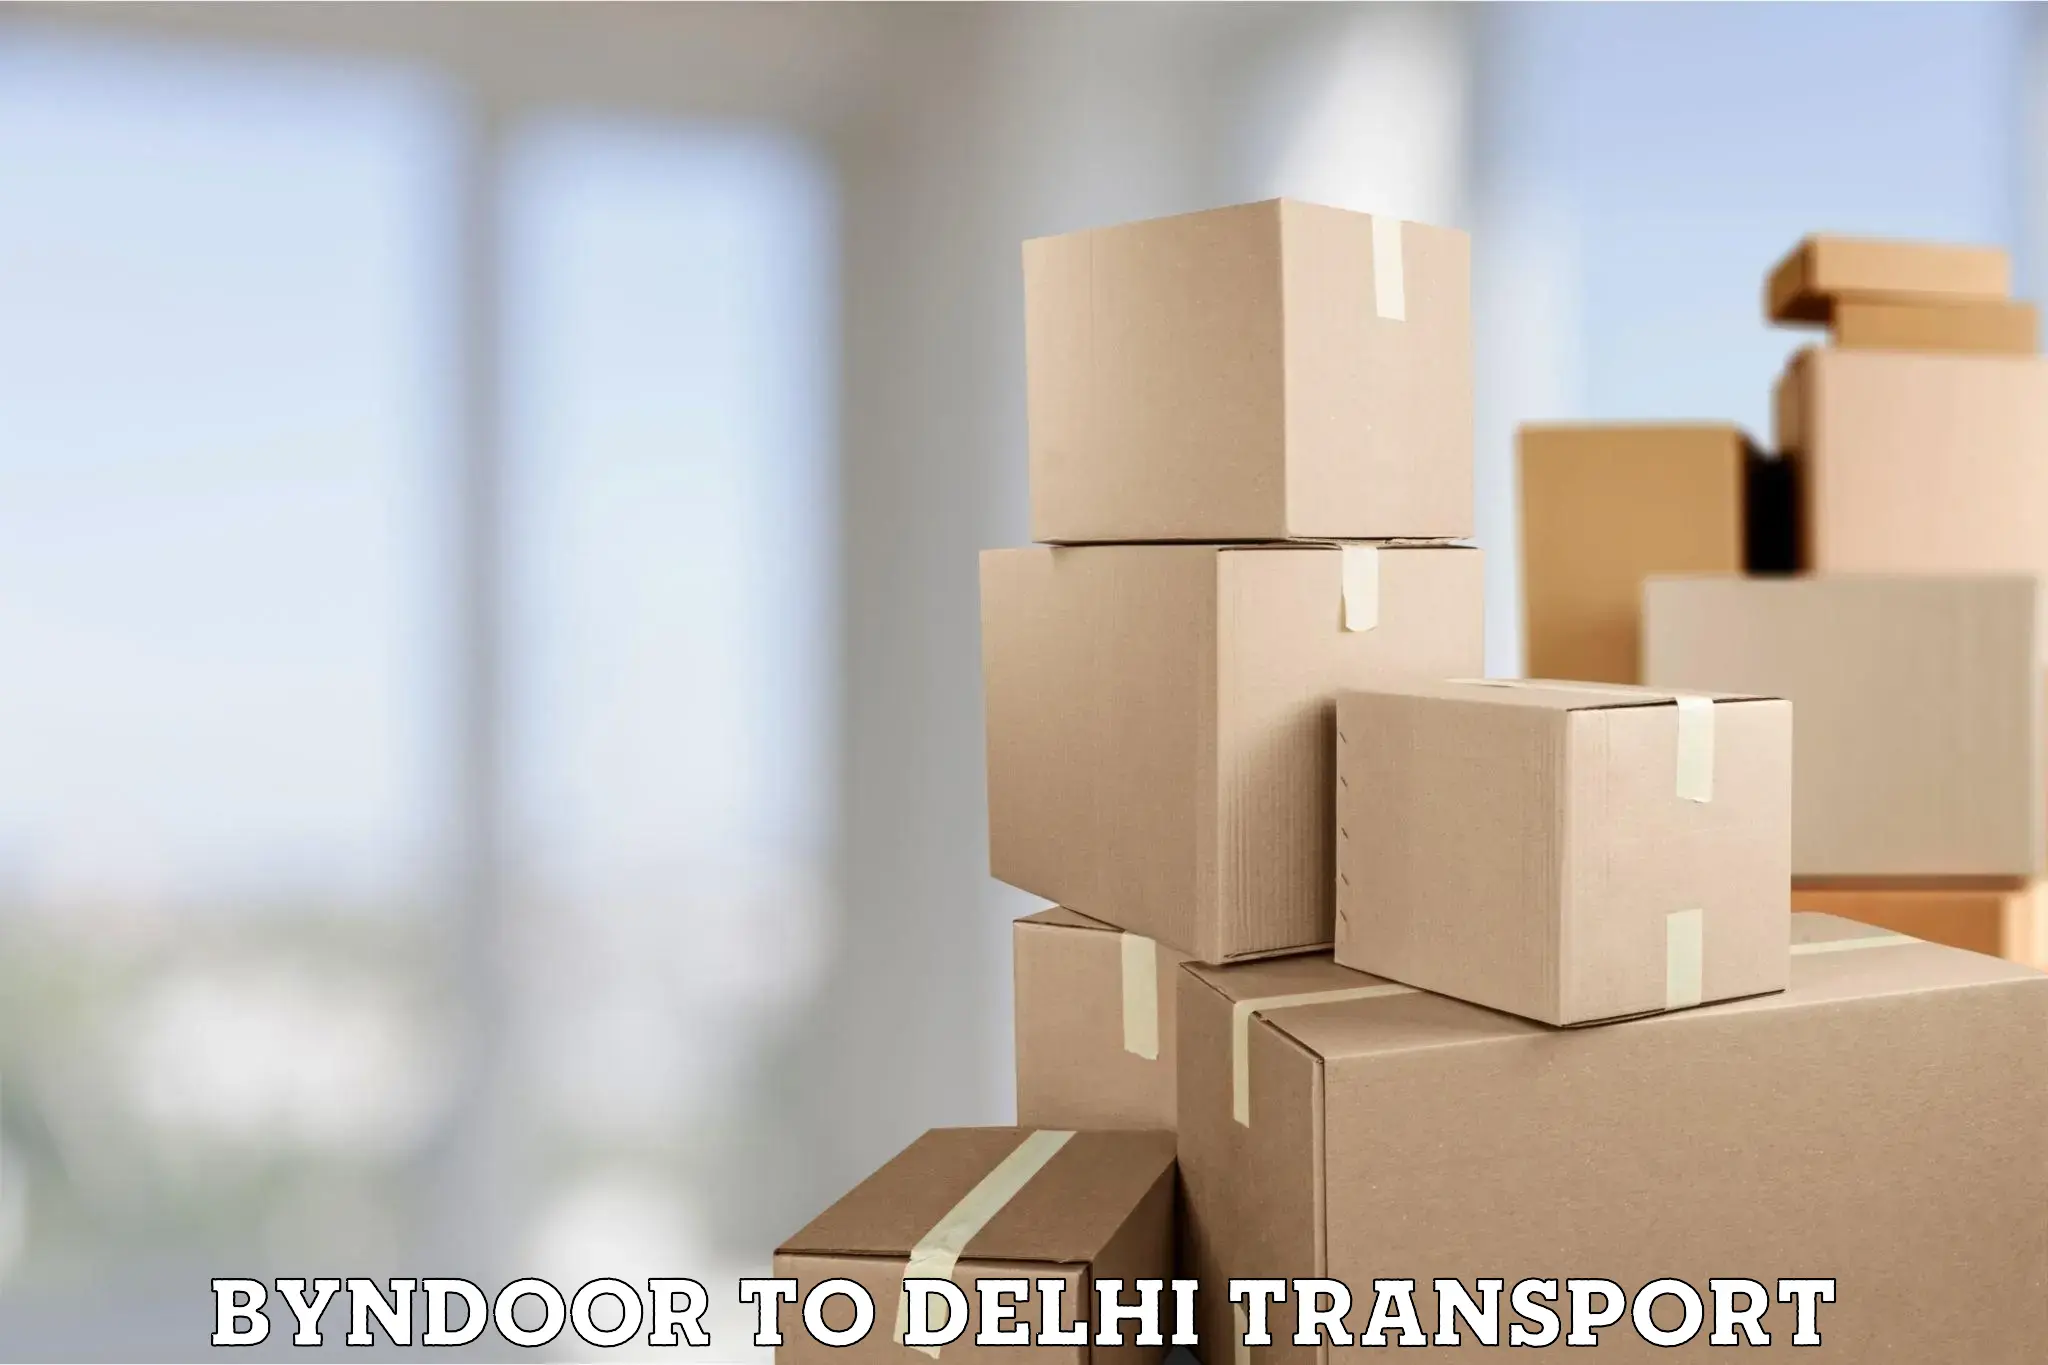 Commercial transport service Byndoor to Lodhi Road